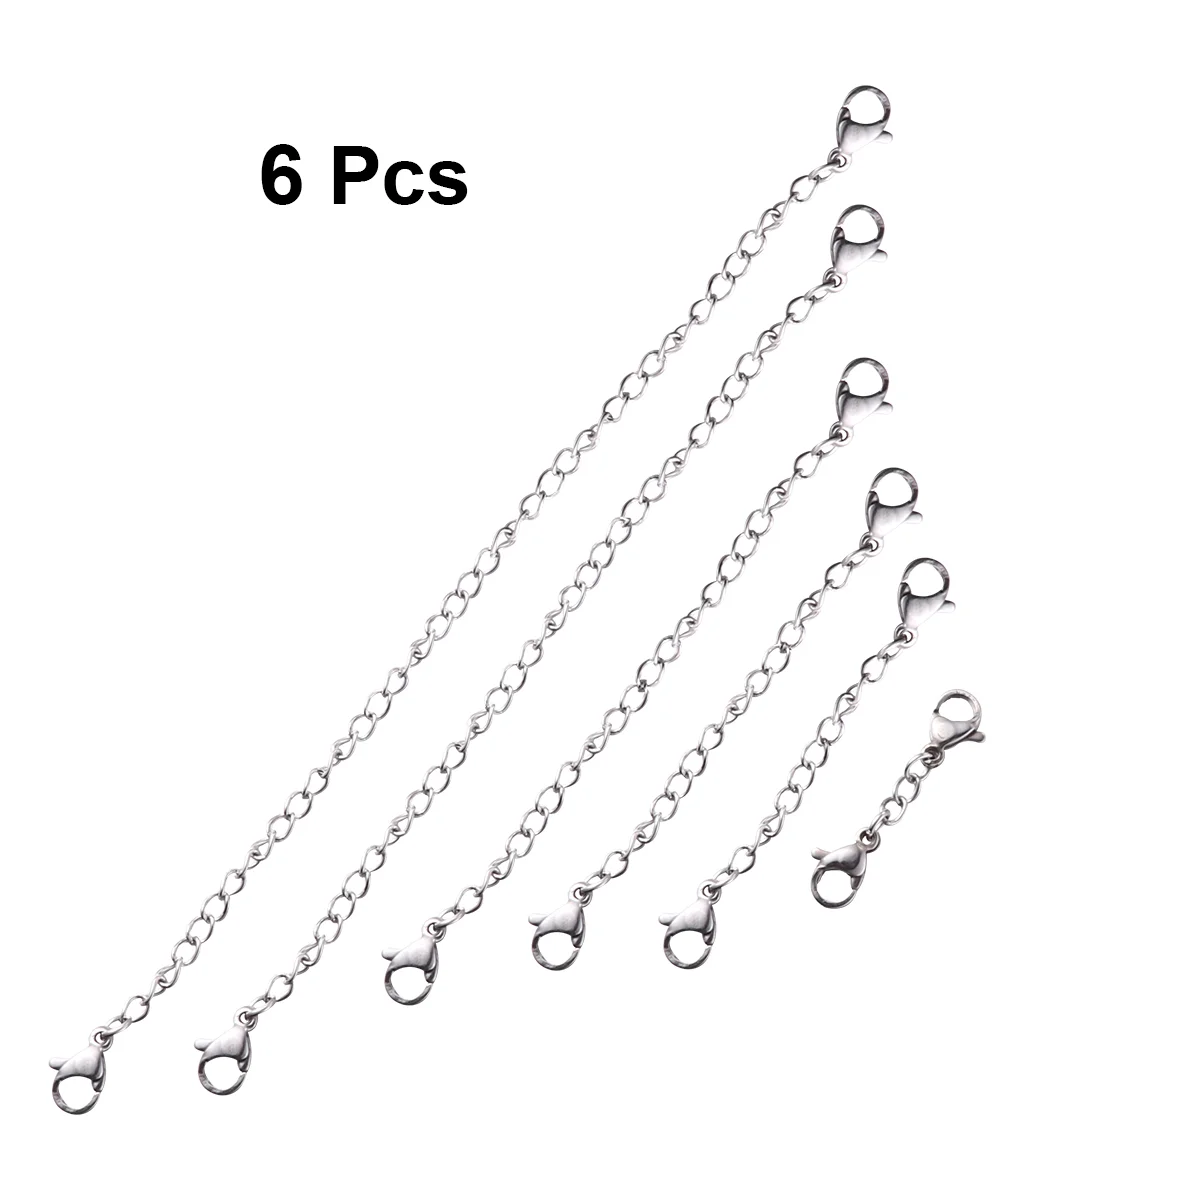 

6pcs Lobster Extender Chain DIY Craft Stainless Steel Necklace Bracelet Chain with Lobster Clasps Buckle Jewelry Making